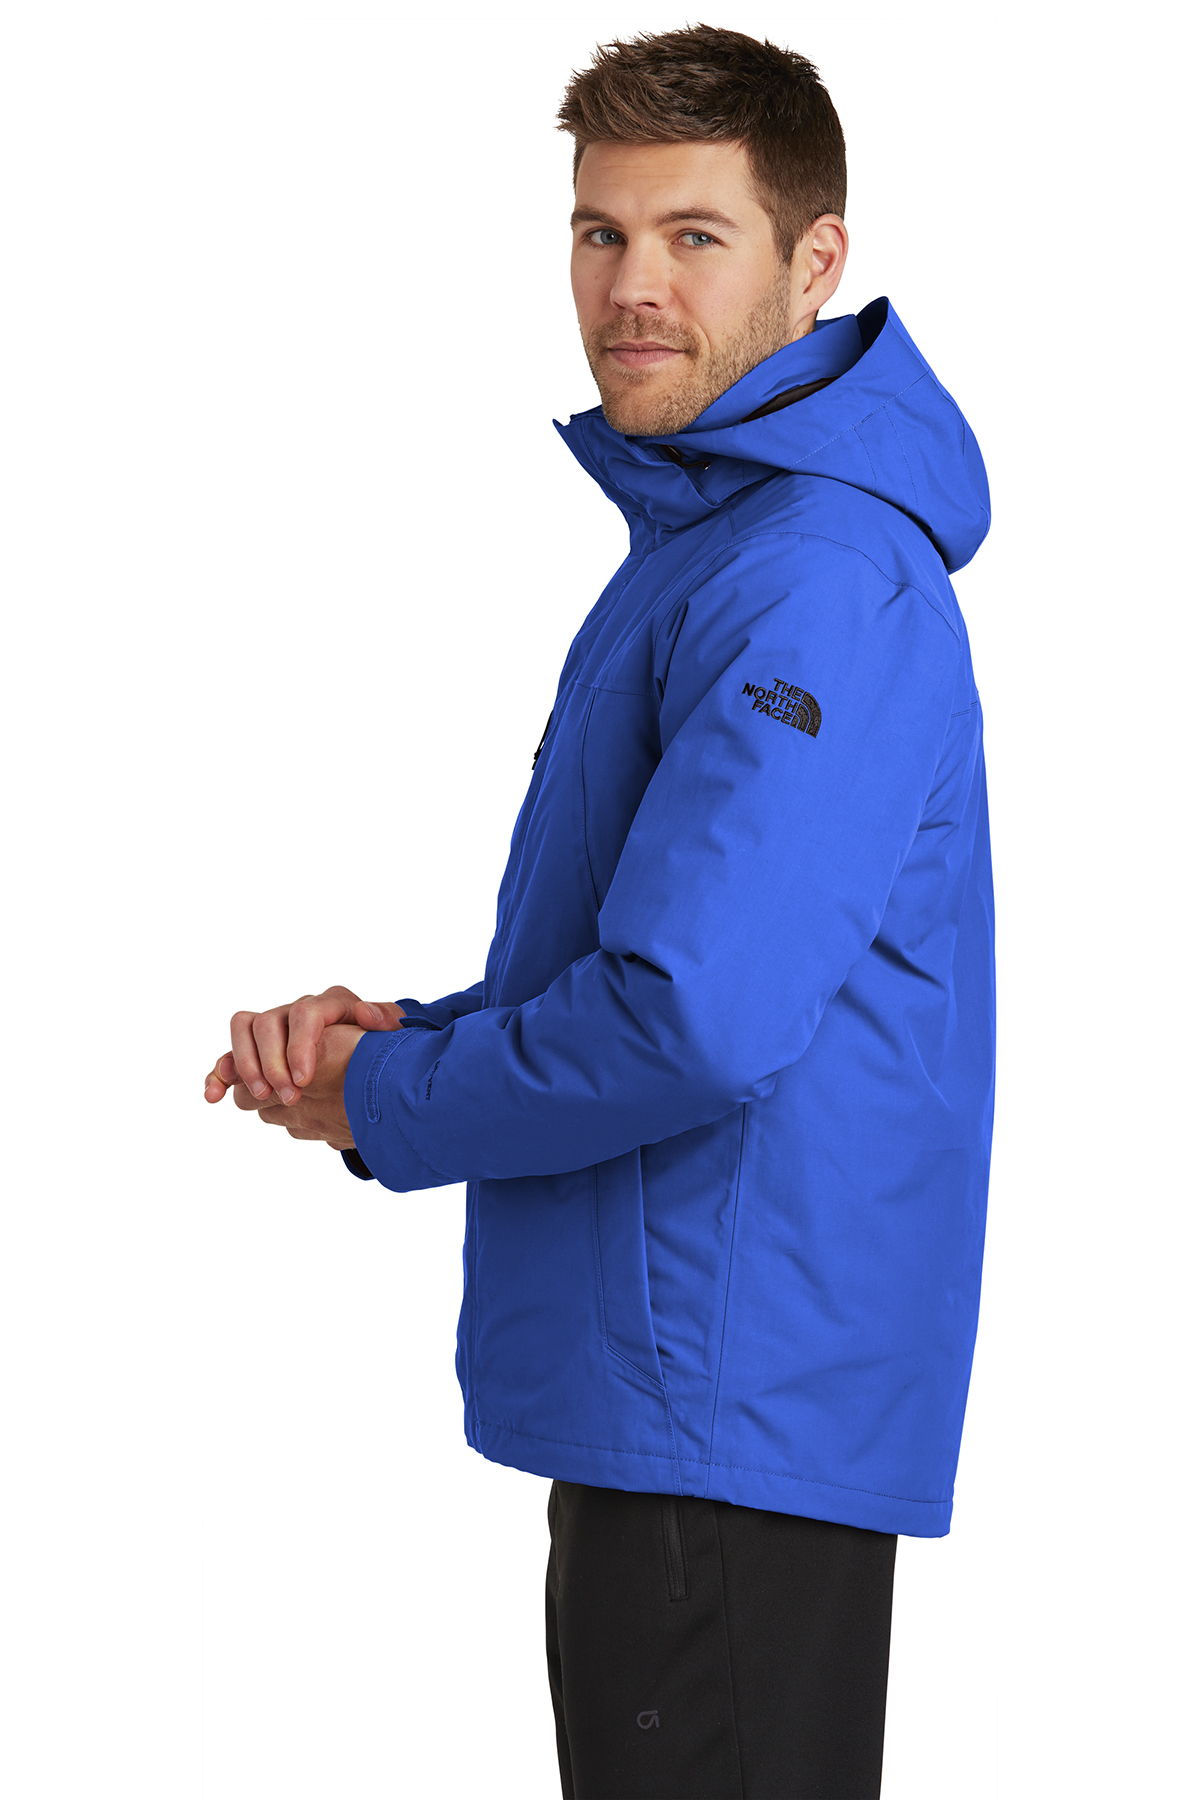 North Face ® Traverse Triclimate ® 3 